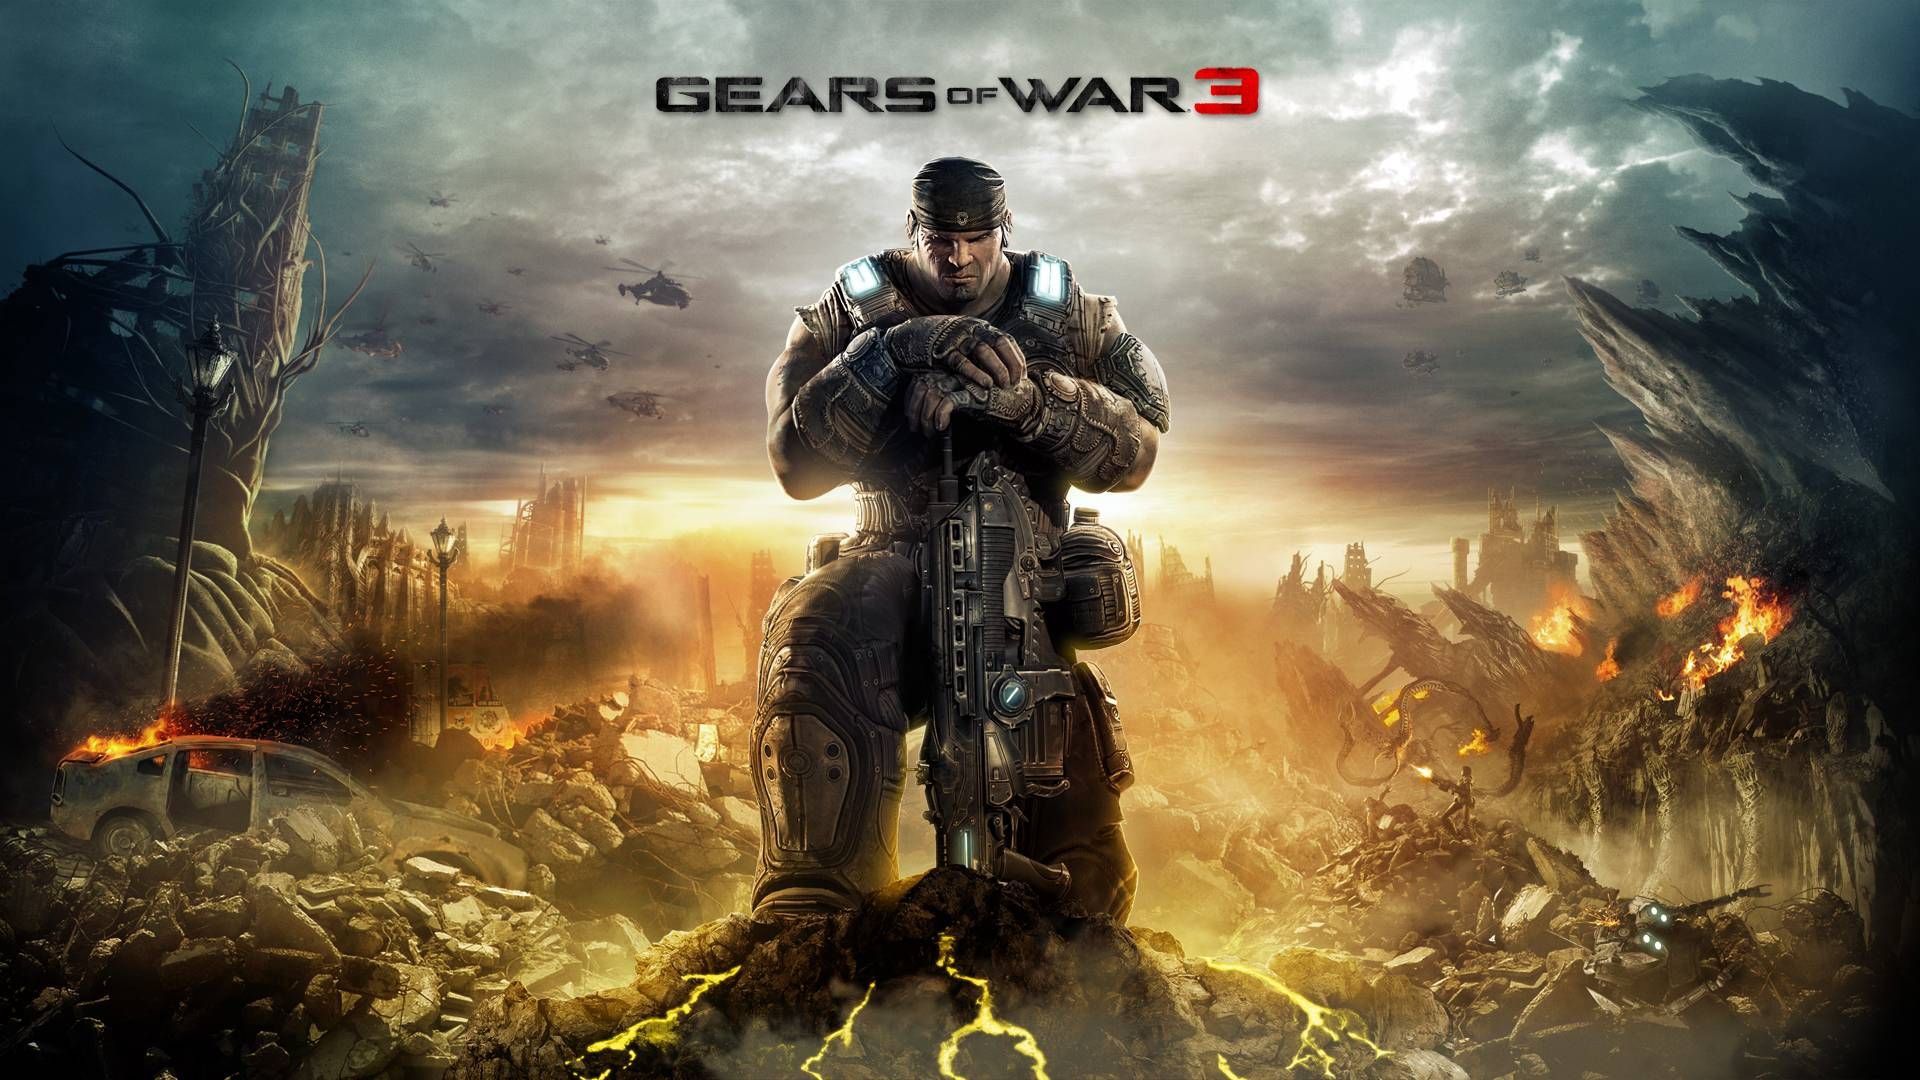 Gears of War 3's “Fenix Rising” DLC: For hardcore multiplayers only